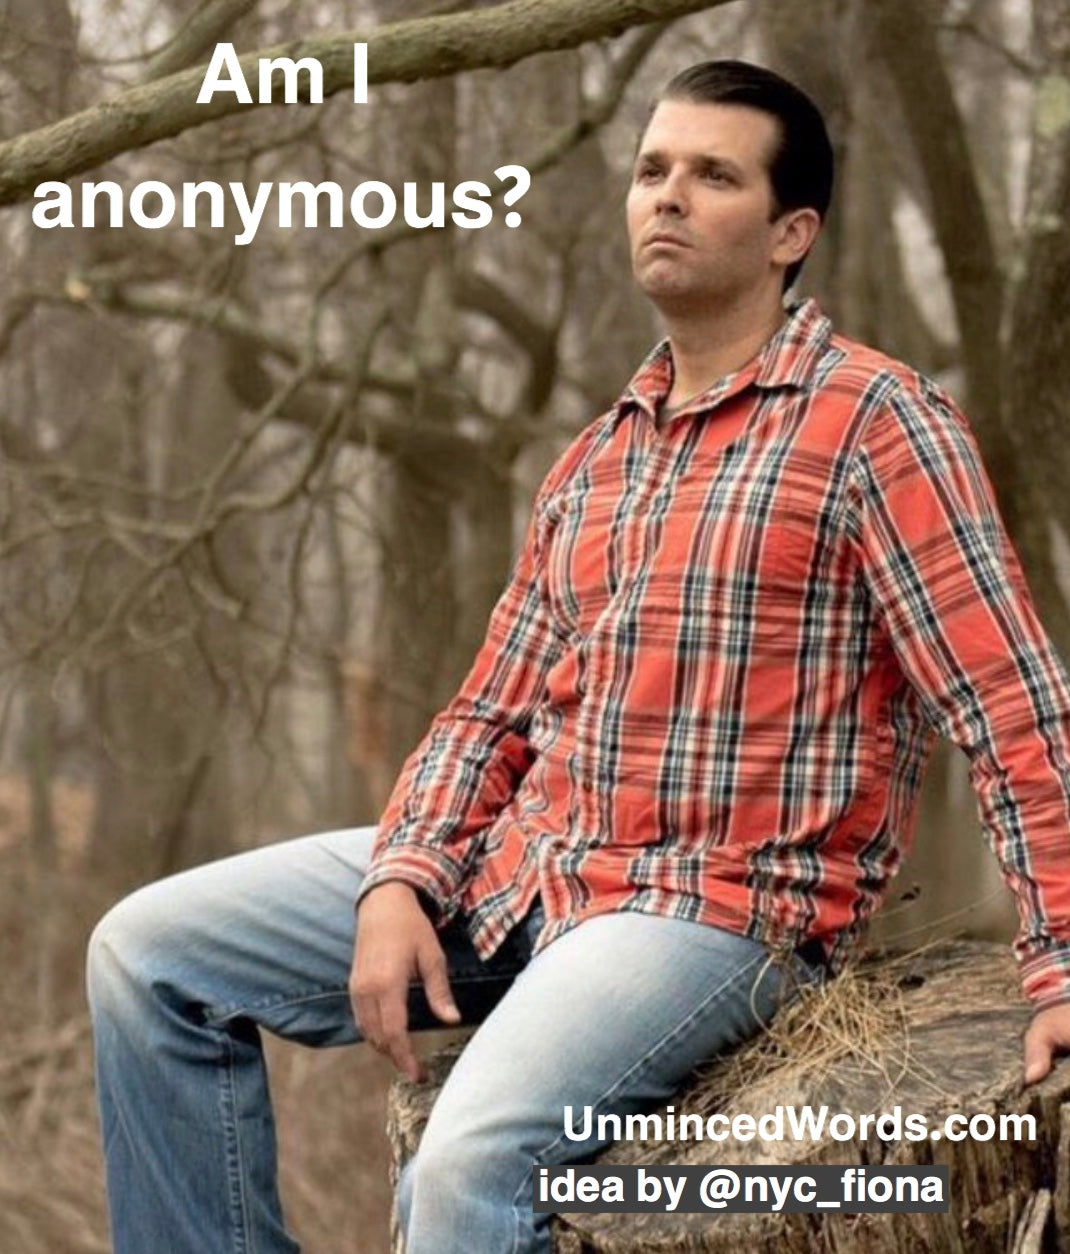 “Am I anonymous?”